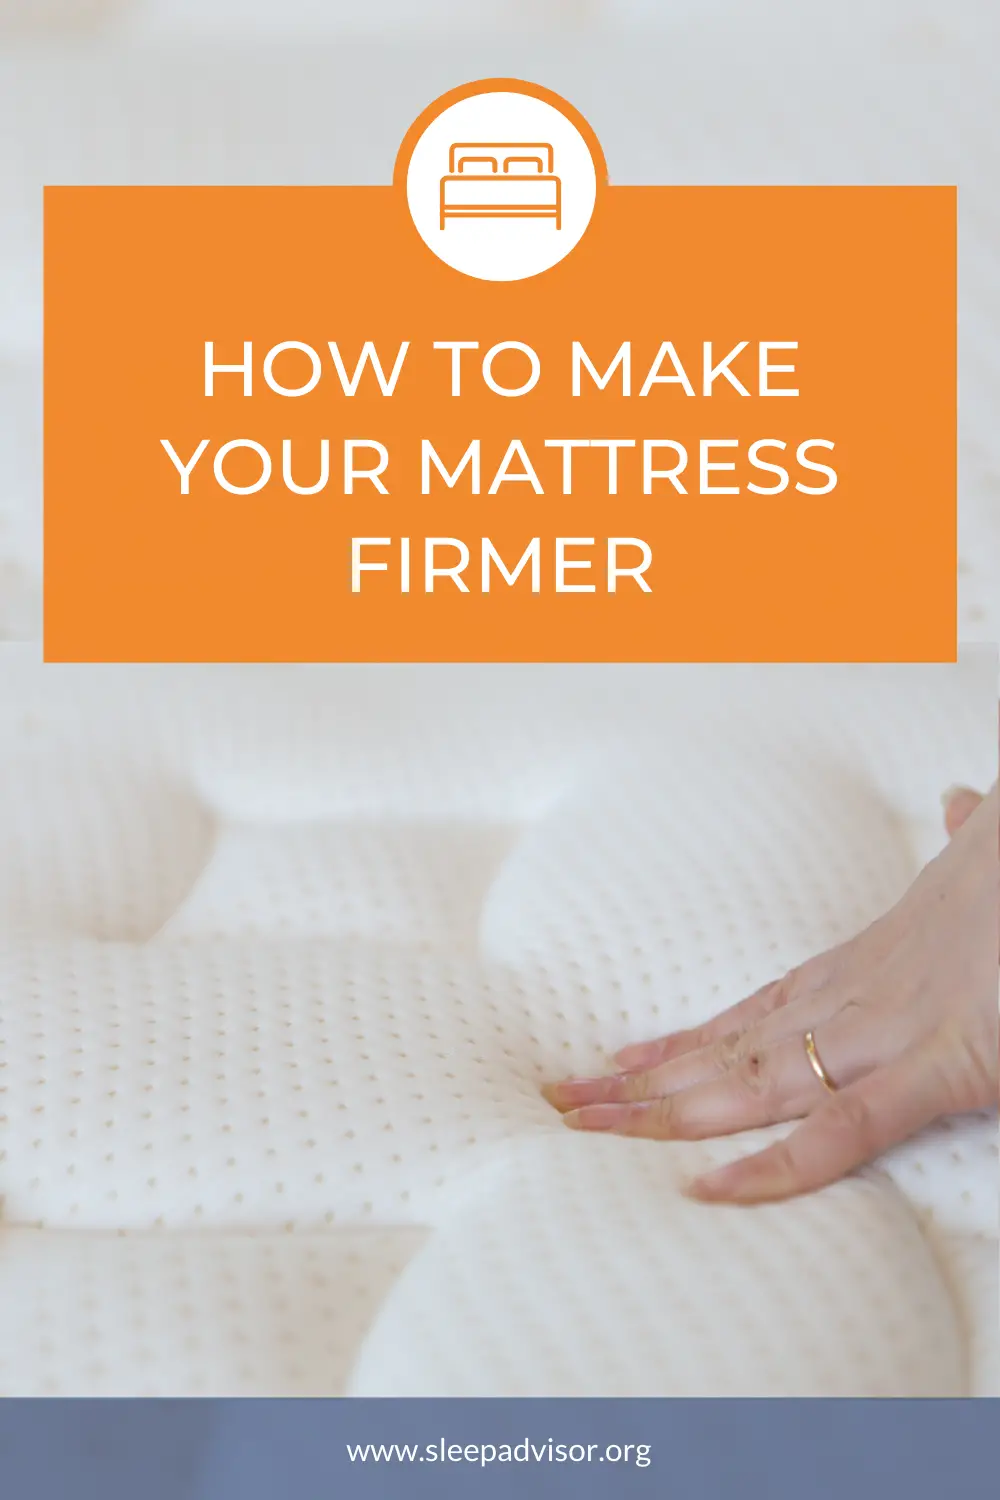 Mattress Too Soft? Learn How to Make Your Mattress Firmer in 2020 ...